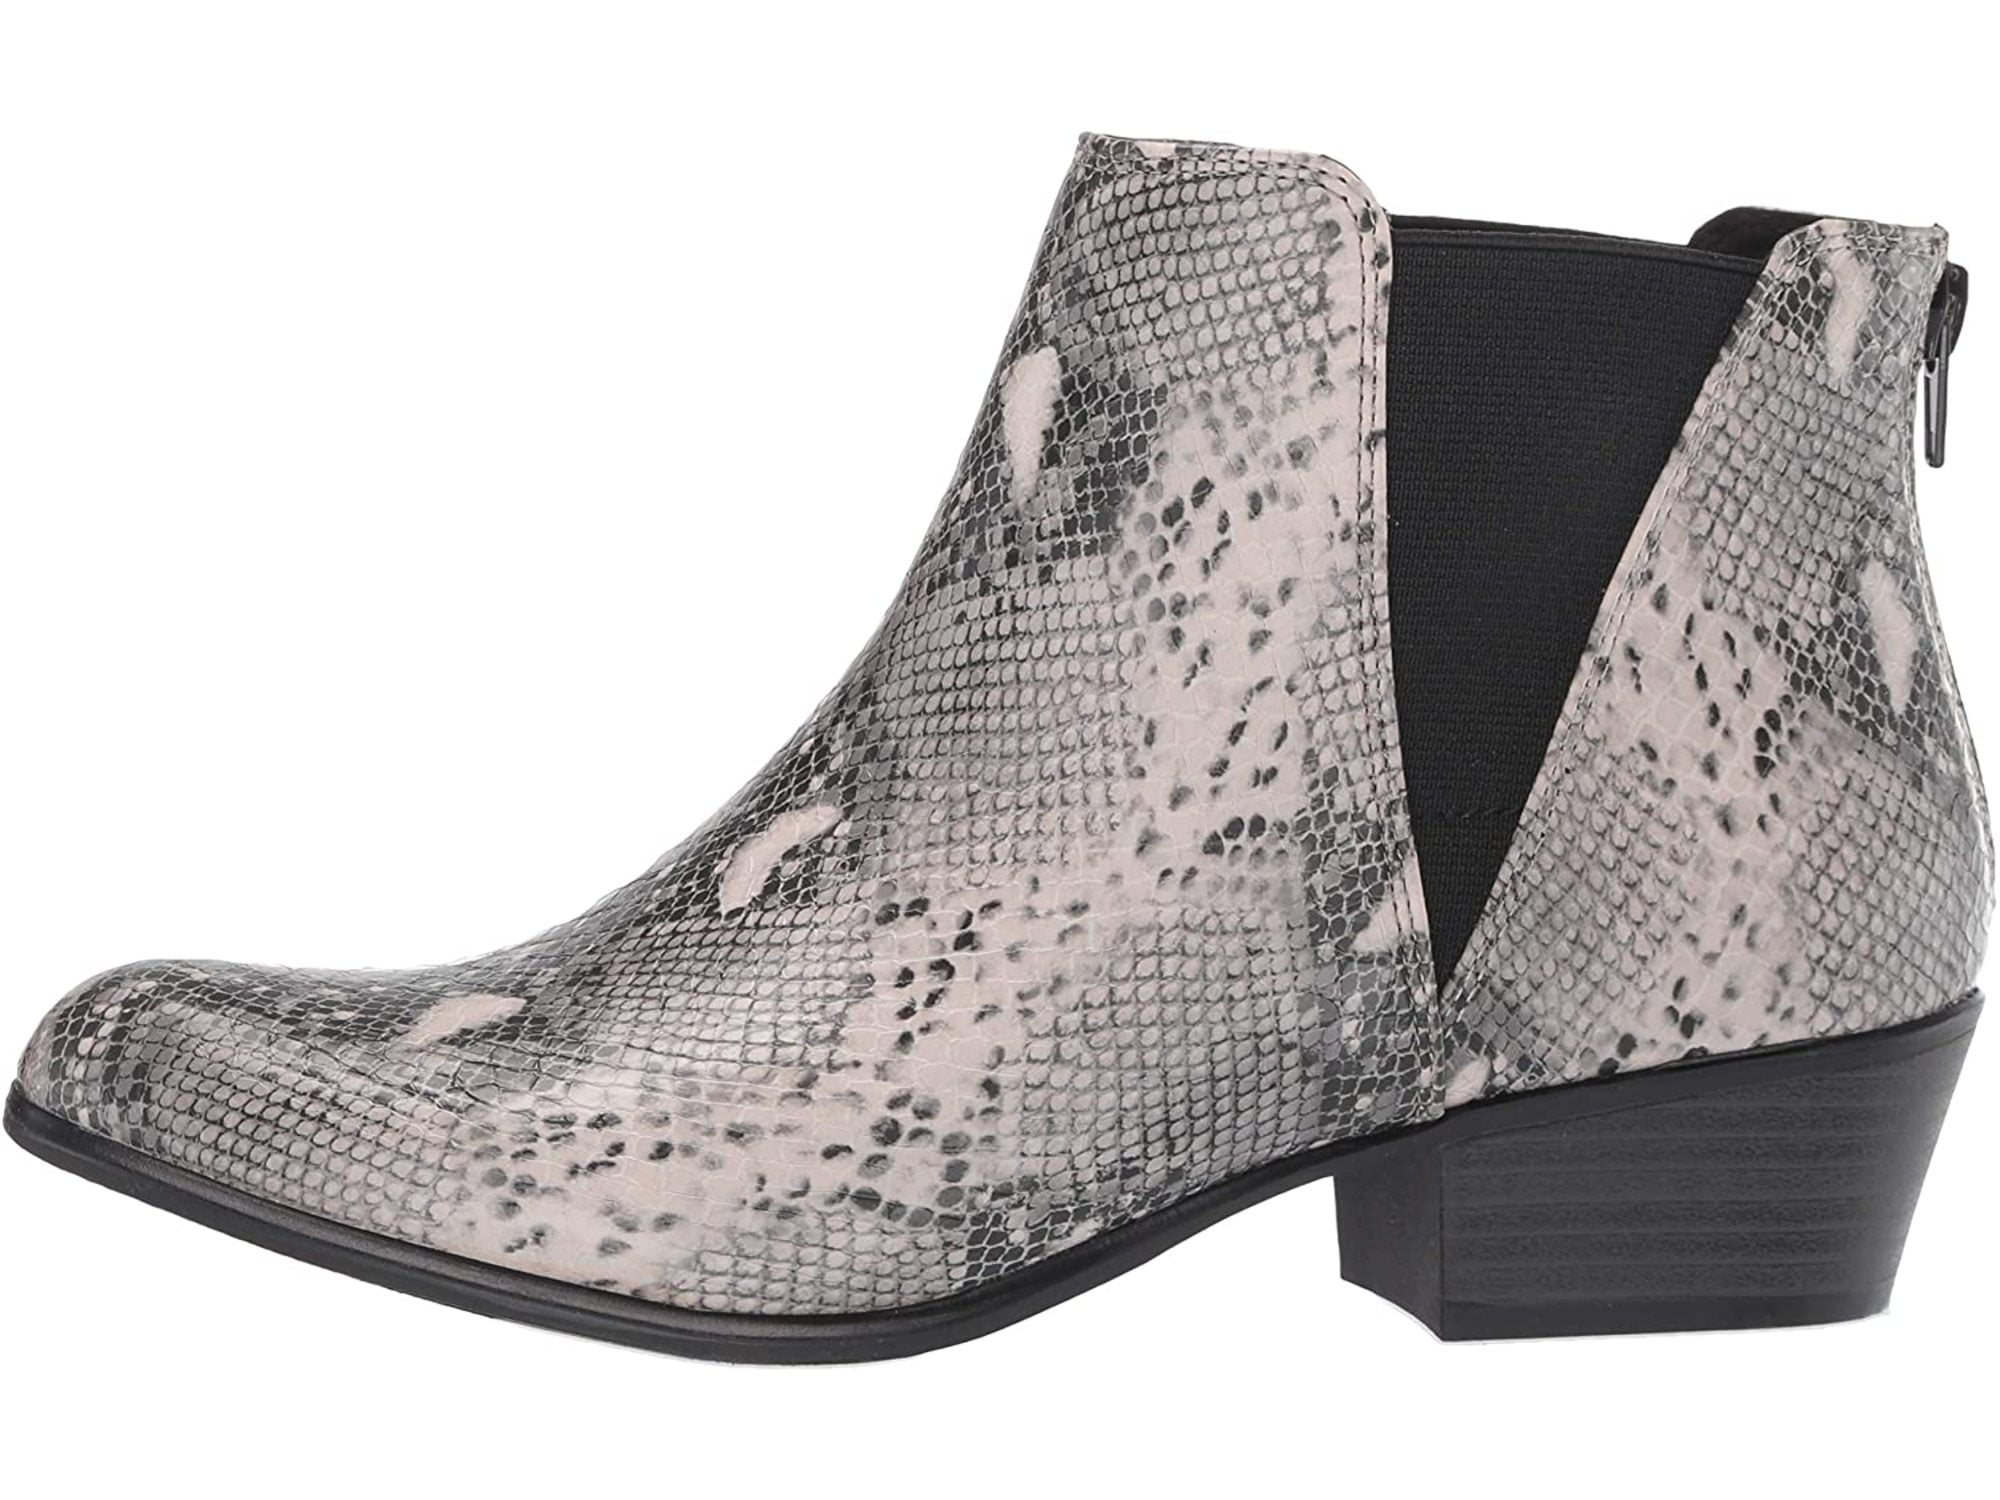 women's chelsea ankle boots